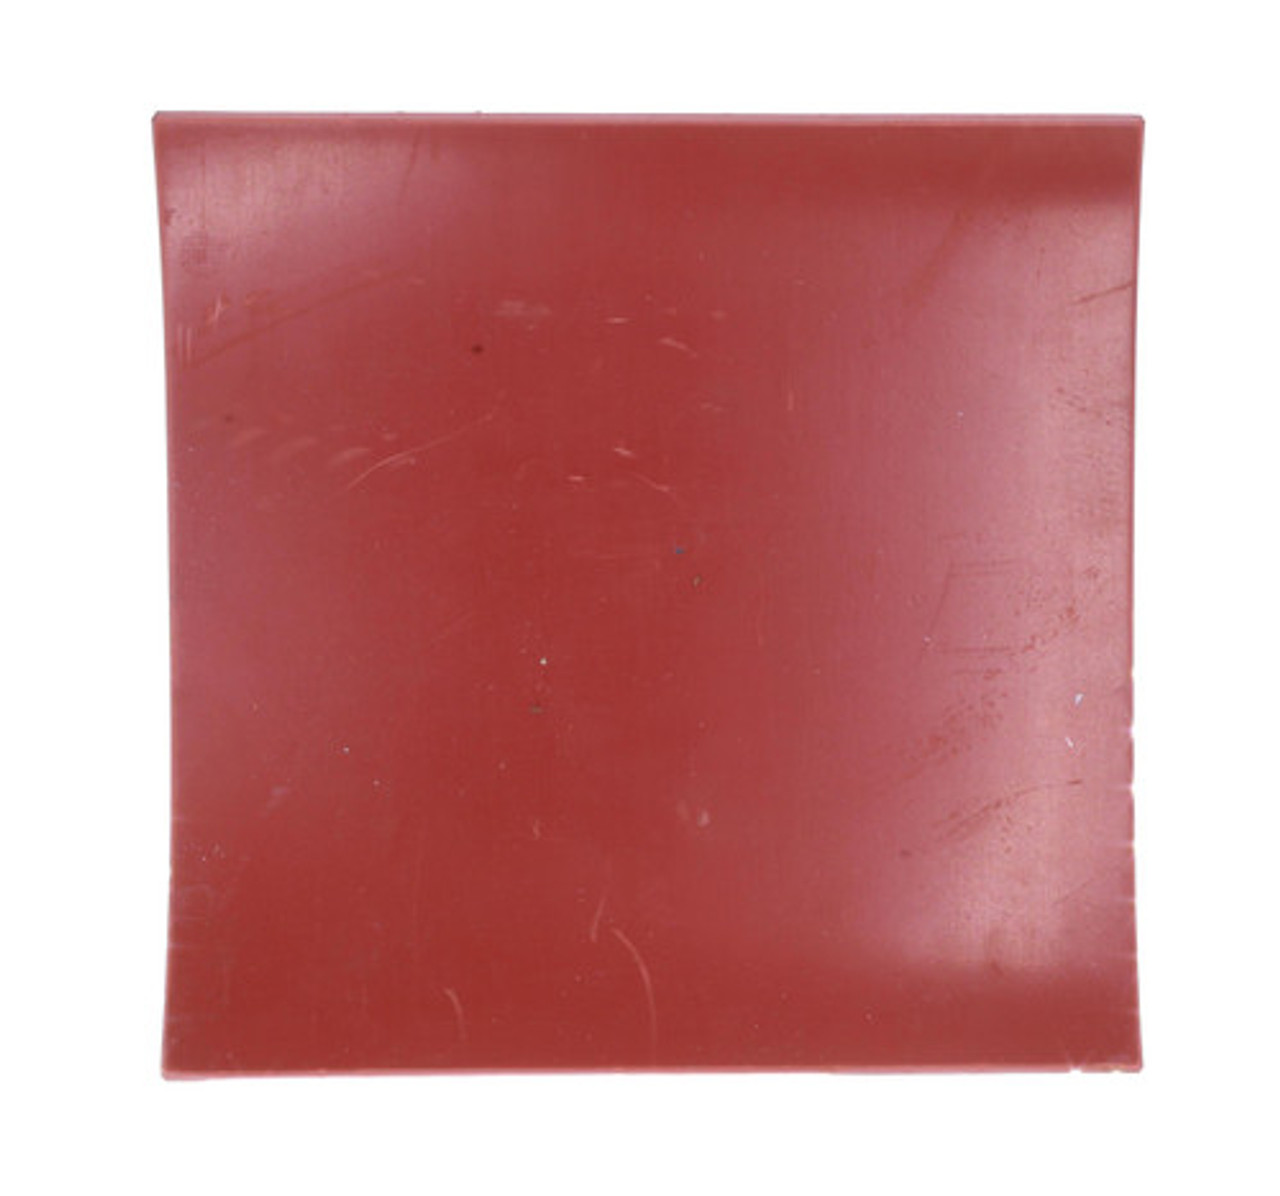 Red High Temp Gasket Material Temperature Resistant Silicone Rubber Sheet  for Seal heat insulation 1/8 Thick 12 x12